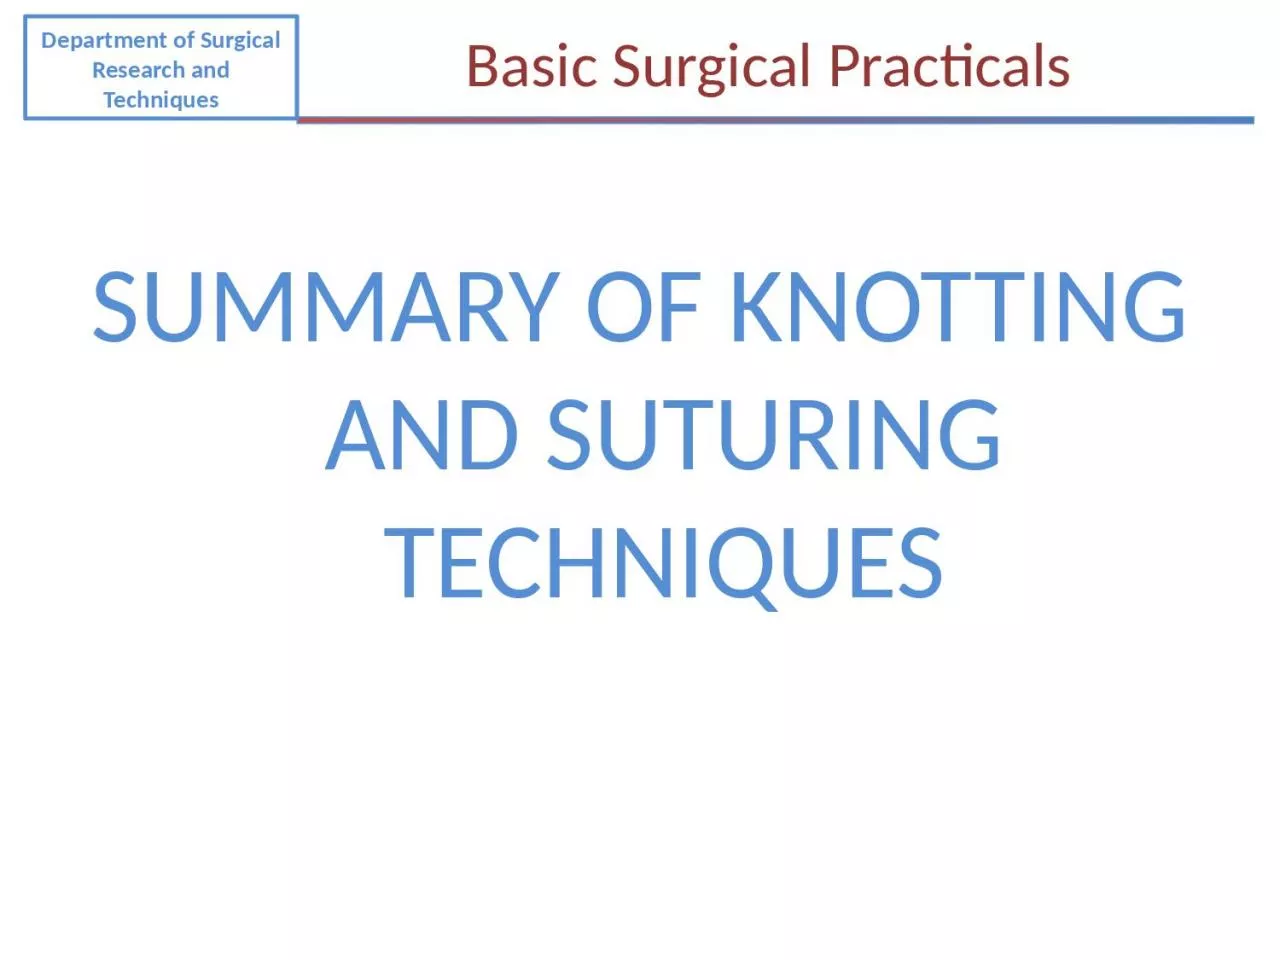 SUMMARY OF KNOTTING AND SUTURING TECHNIQUES